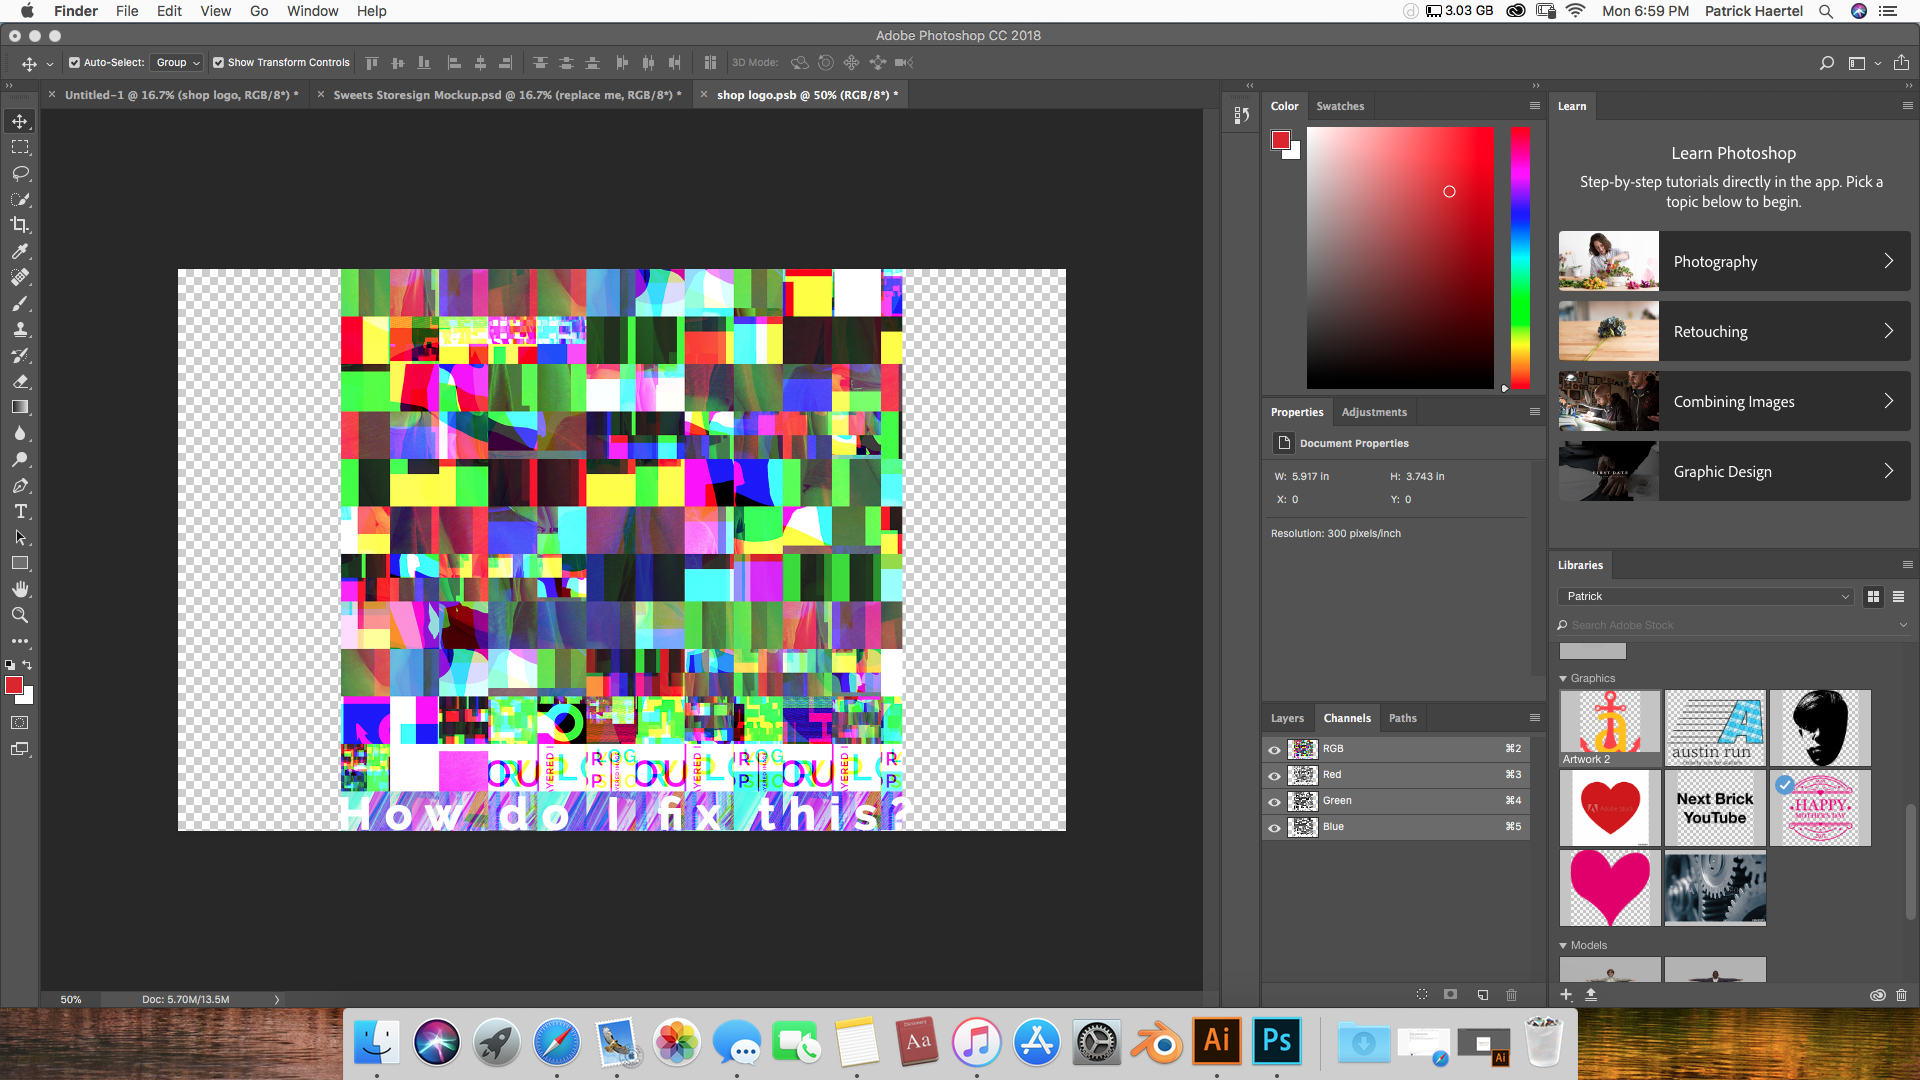 Solved Weird Glitch When Dragging Image Into Photoshop Adobe Support Community